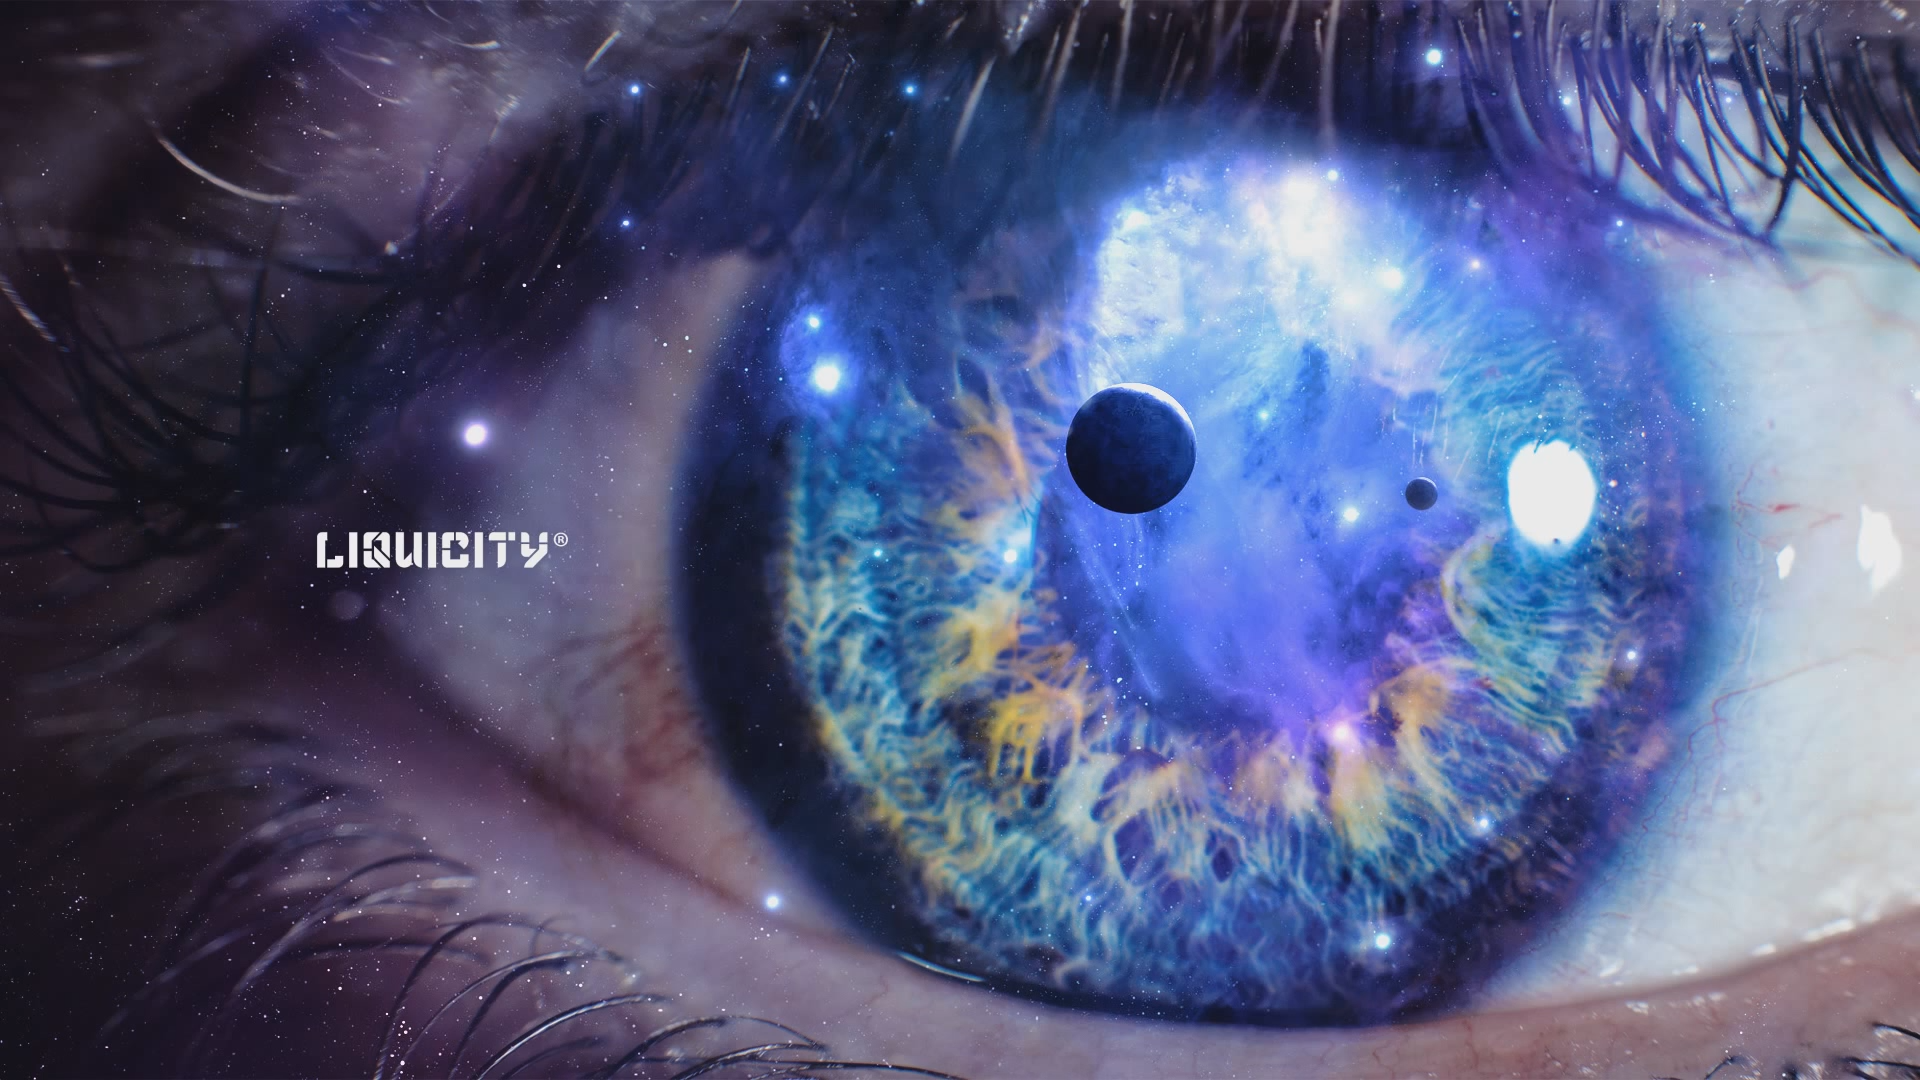 General 1920x1080 Liquicity space sky colorful digital art eyes planet